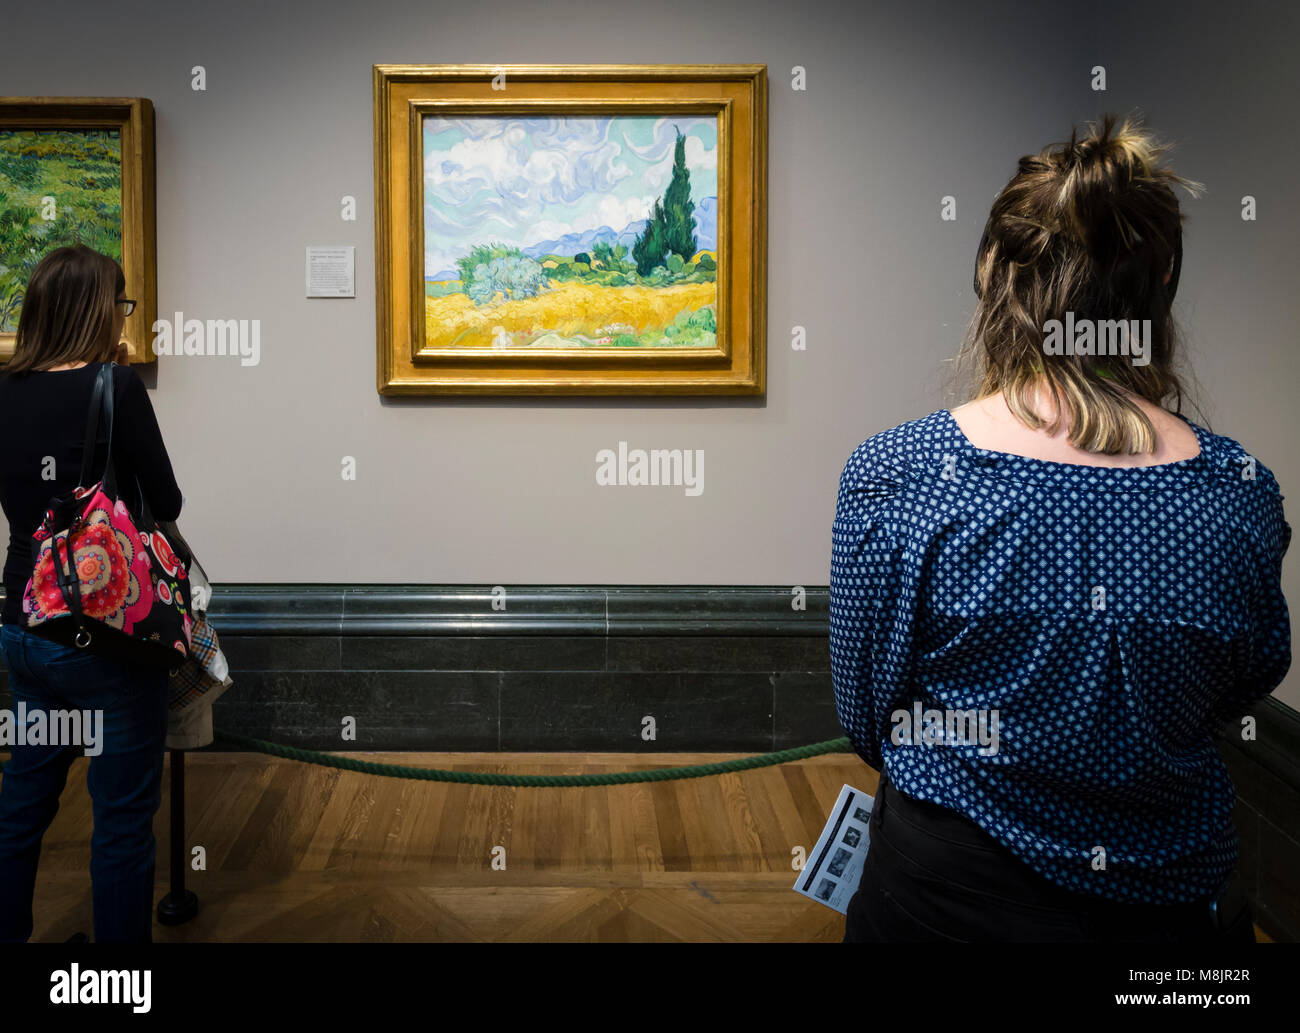 London, UK - 1 Sep 2017: Visitors of London's National Gallery are watching Vincent van Gogh's famous oil painting 'A Wheatfield, with Cypresses'. Stock Photo